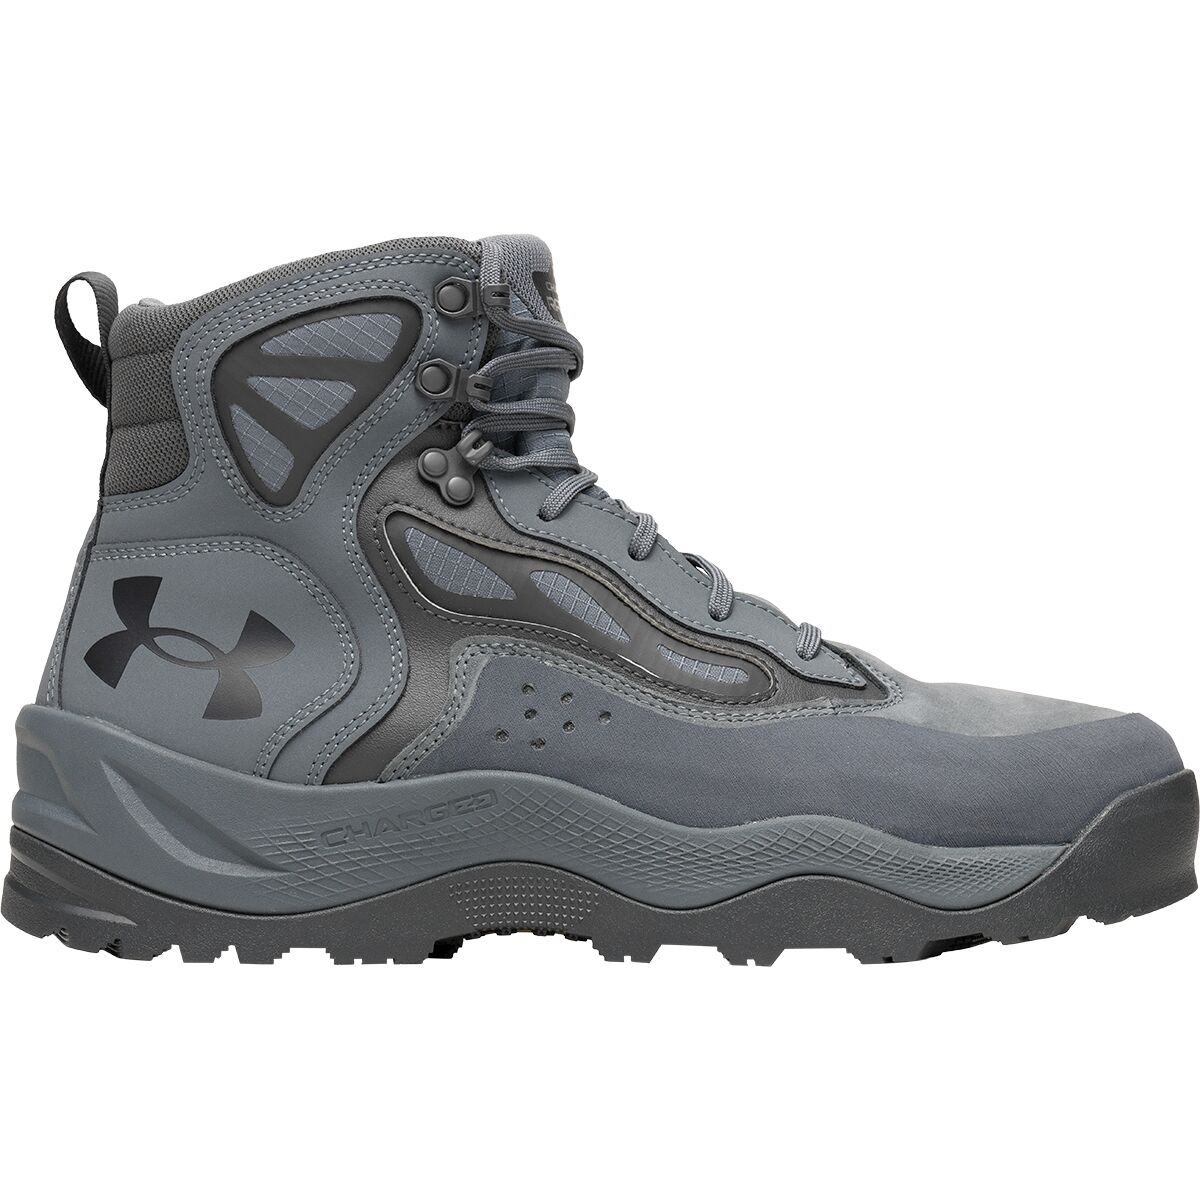 Under Armour Charged Raider WP Boot - Men's -